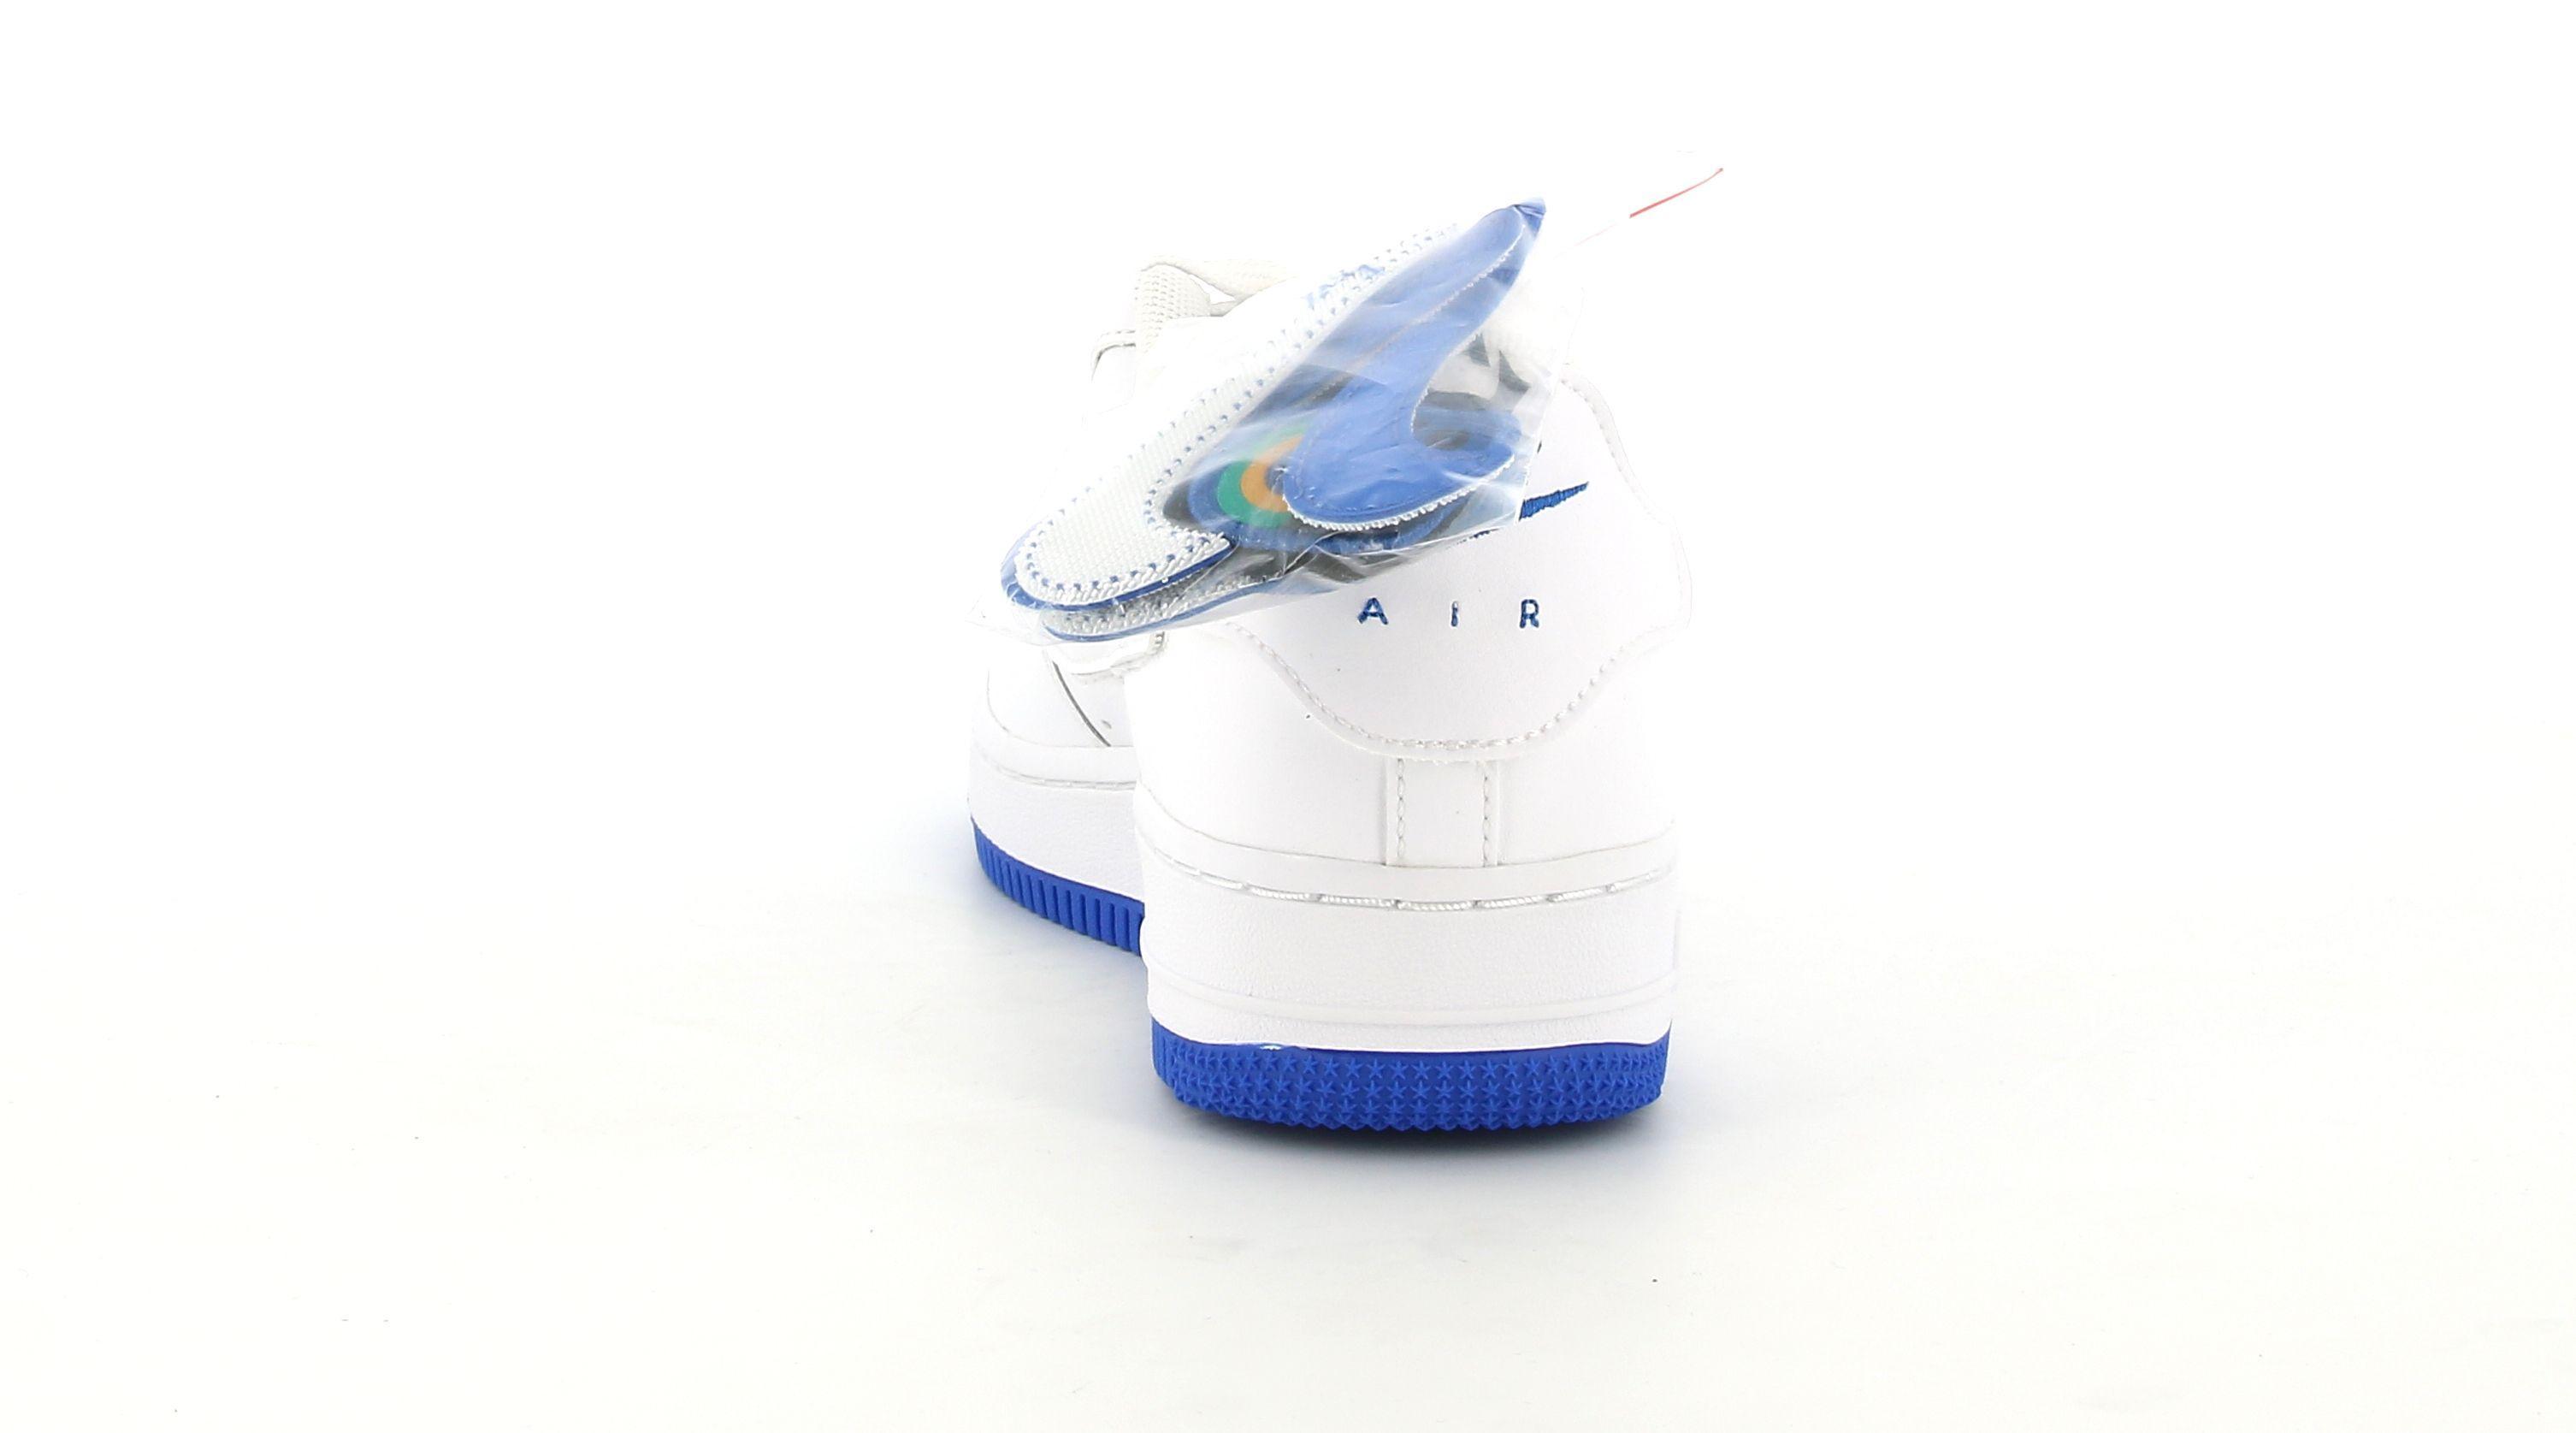 nike sneakers nike air force 1 db4545 105 (gs). unisex, colore bianco/blue